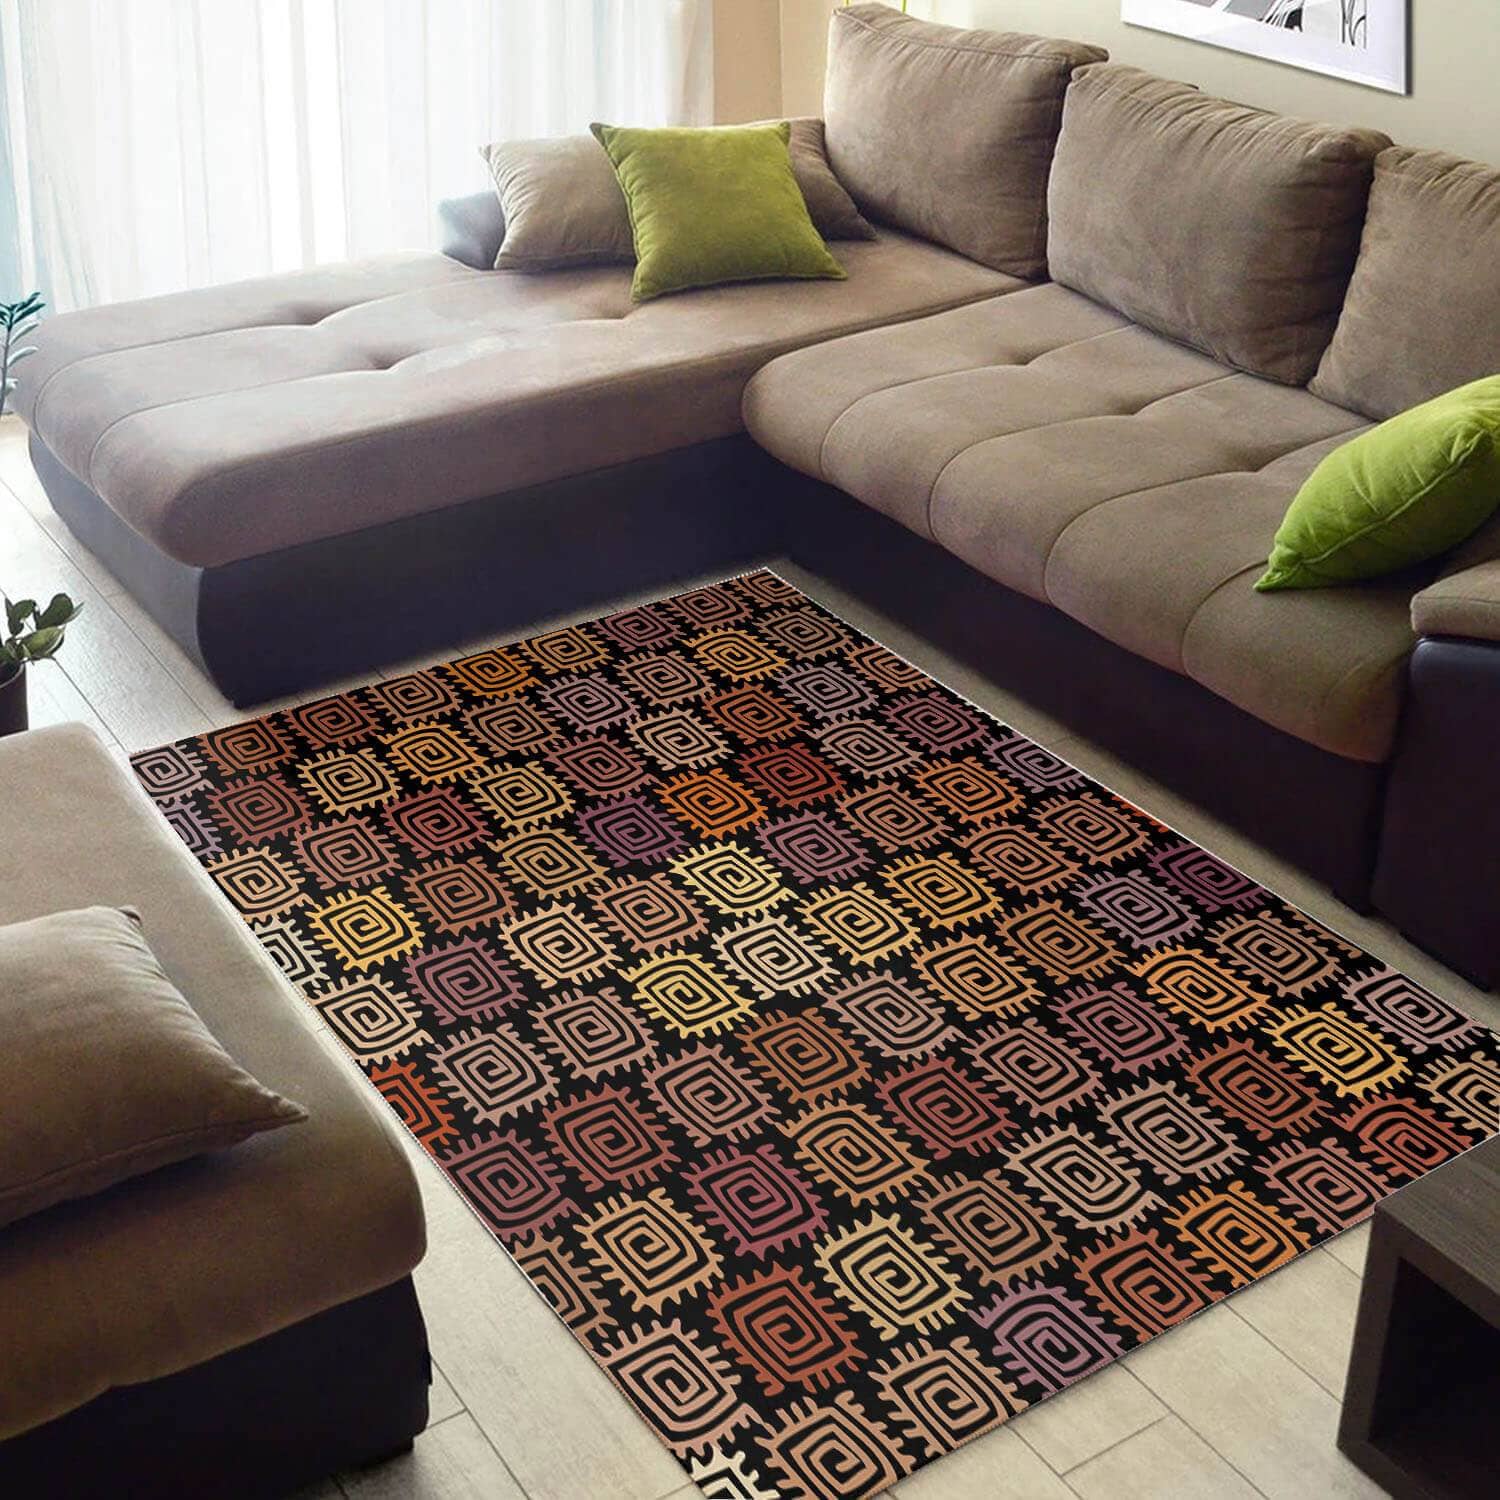 Trendy African Style Cool Black History Month Afrocentric Pattern Art Large Themed Home Rug